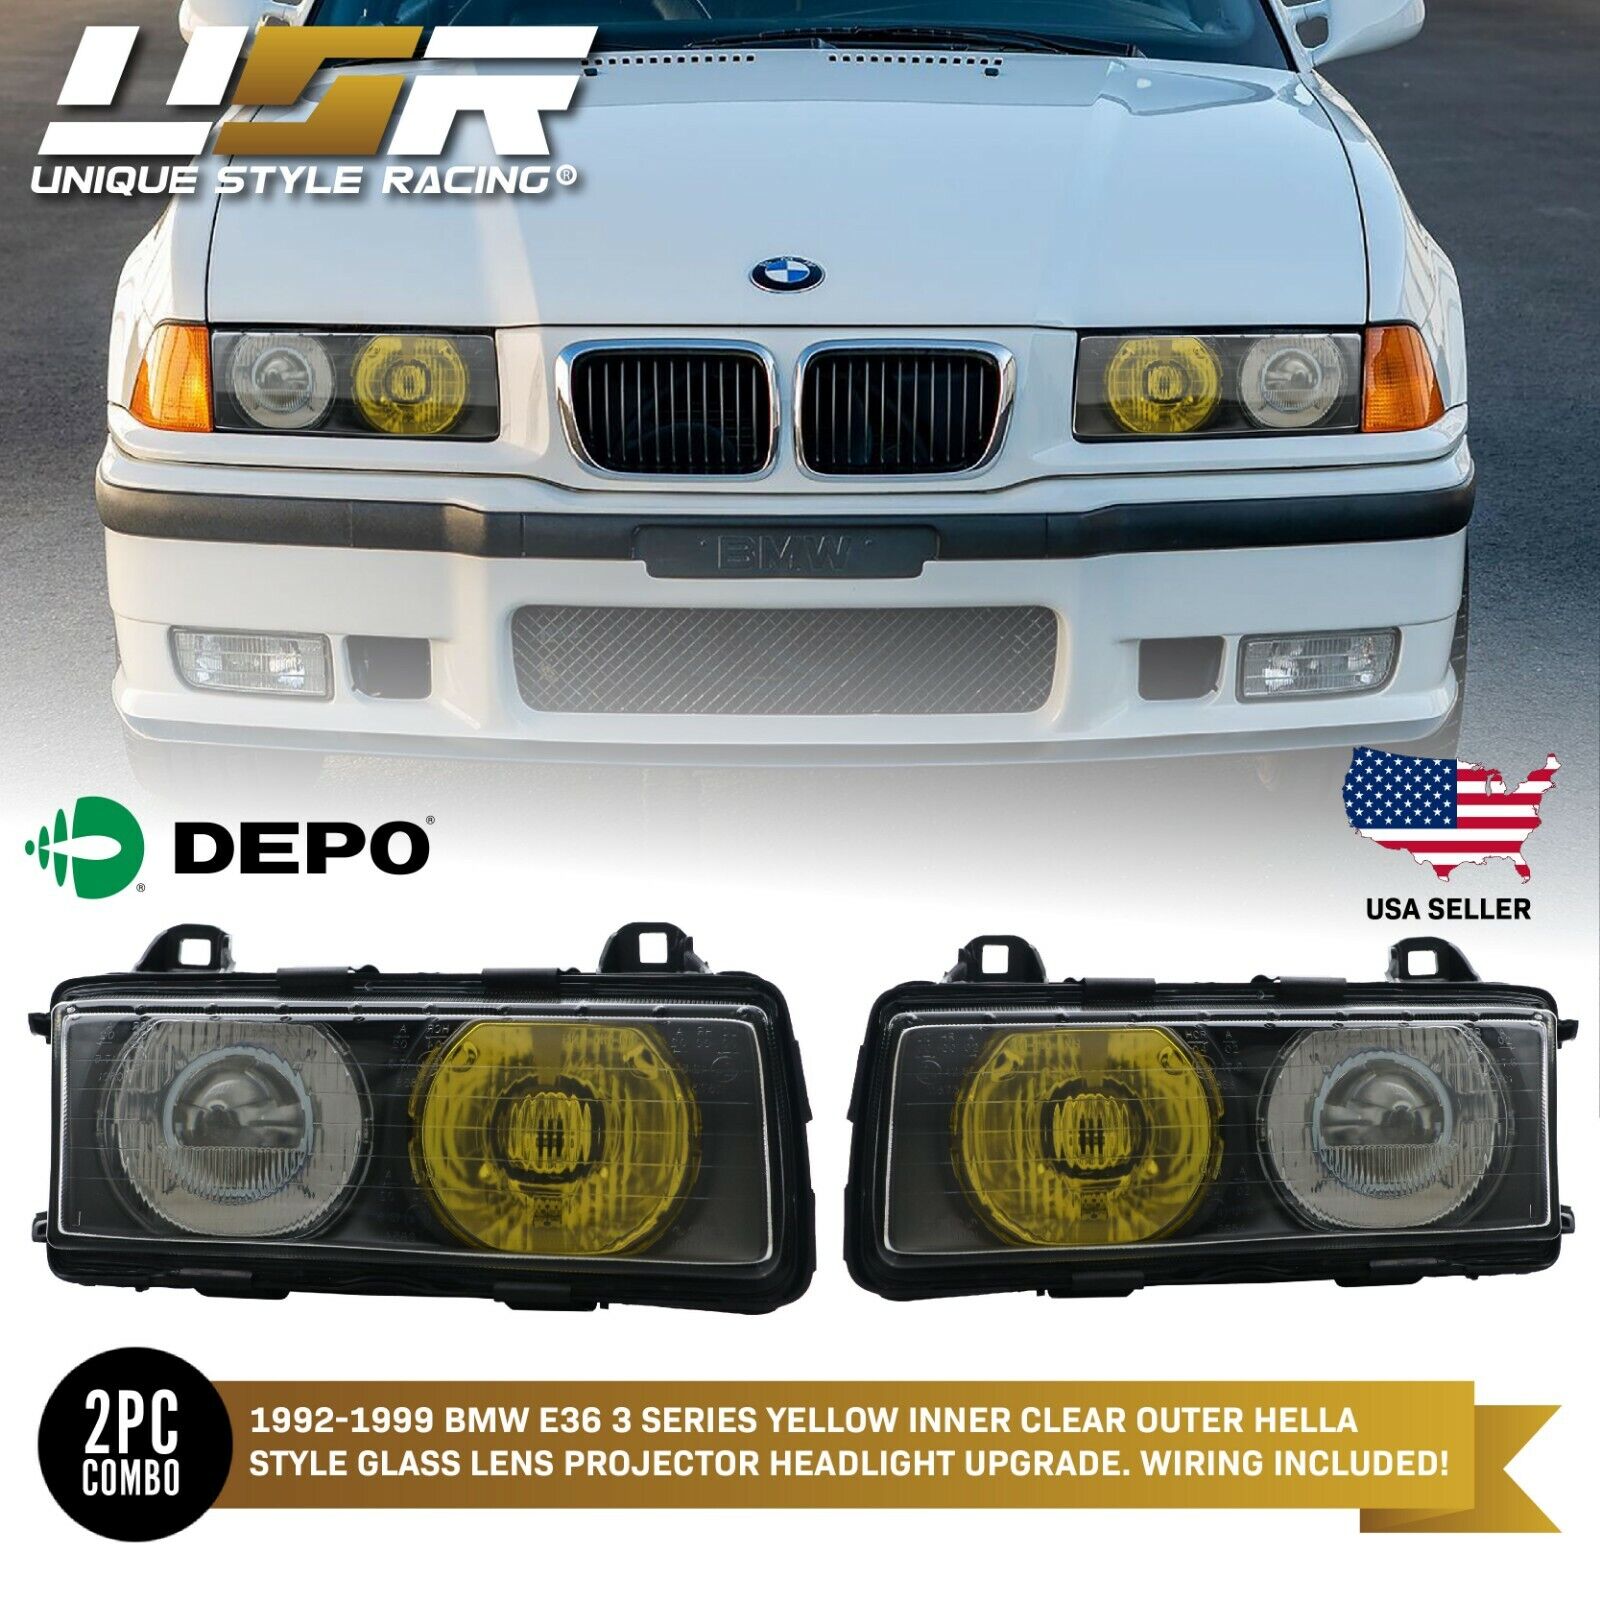 French Yellow/Clear GLASS Lens DEPO Euro Hella Projector Headlights For BMW E36